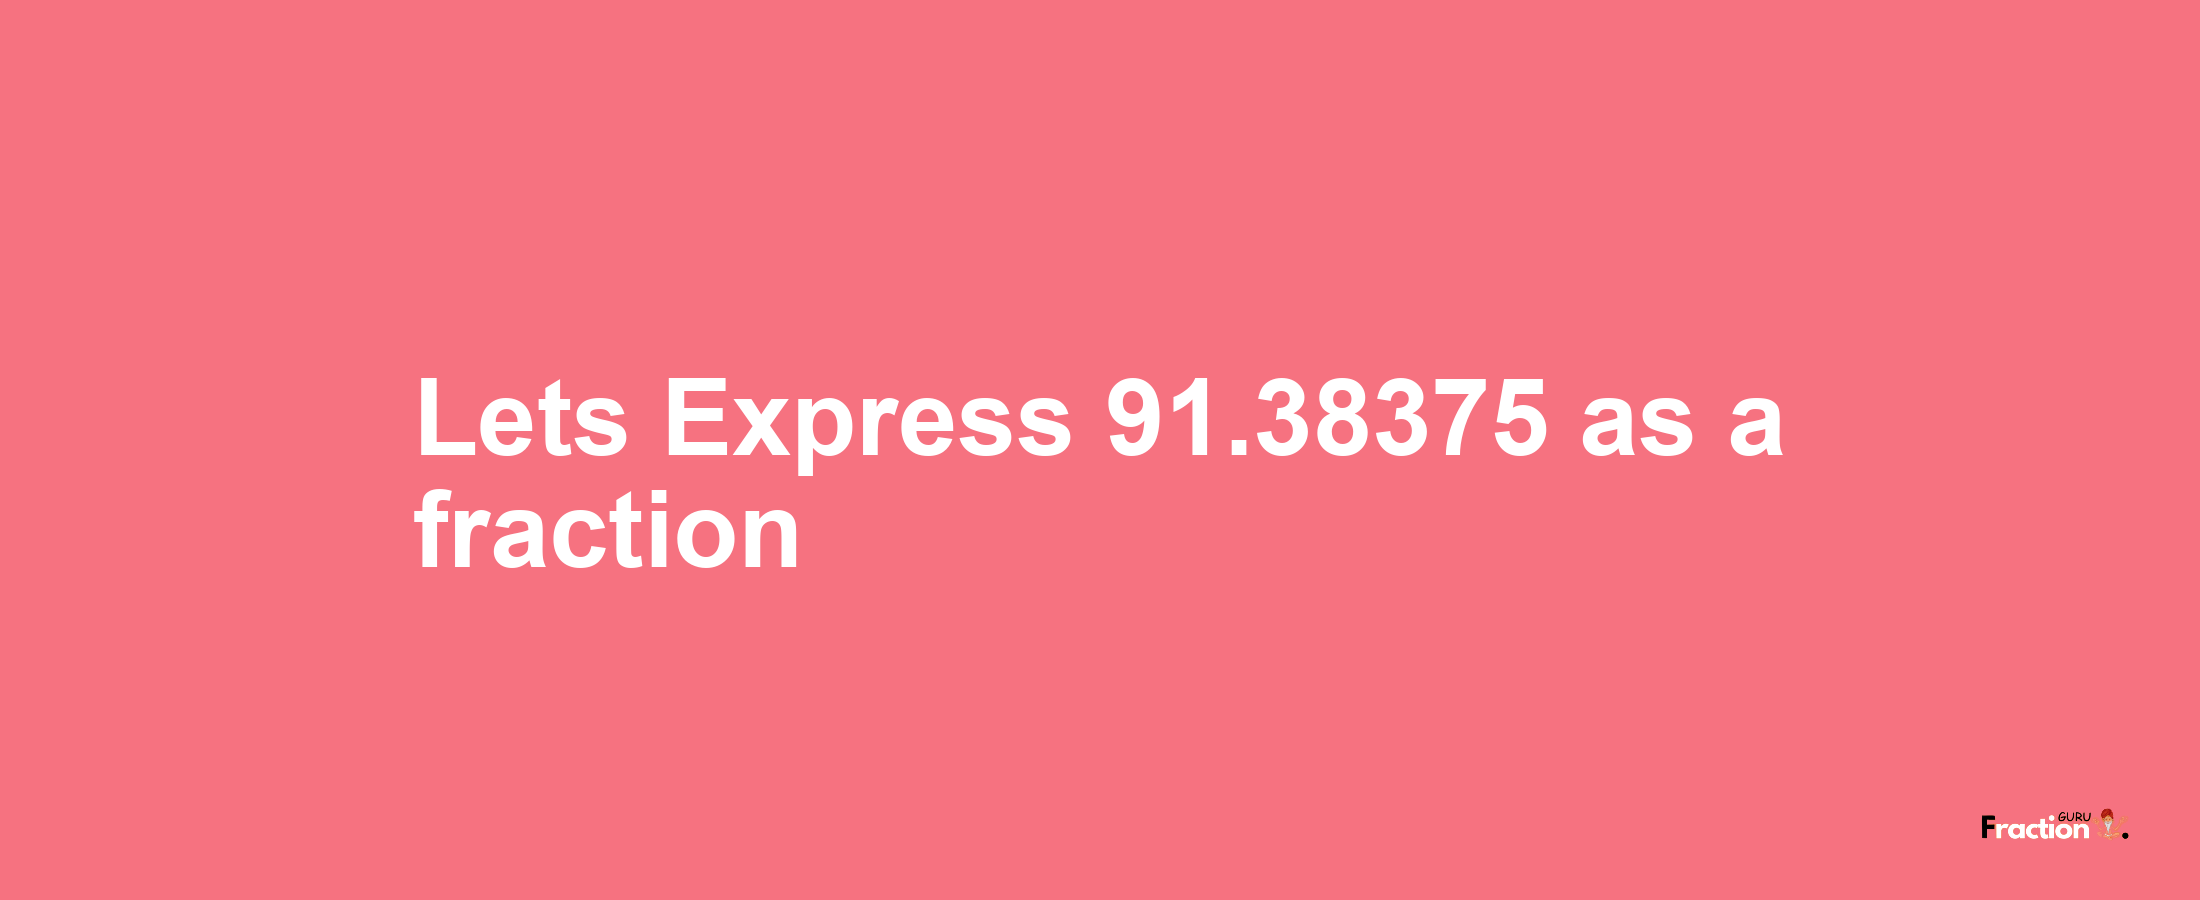 Lets Express 91.38375 as afraction